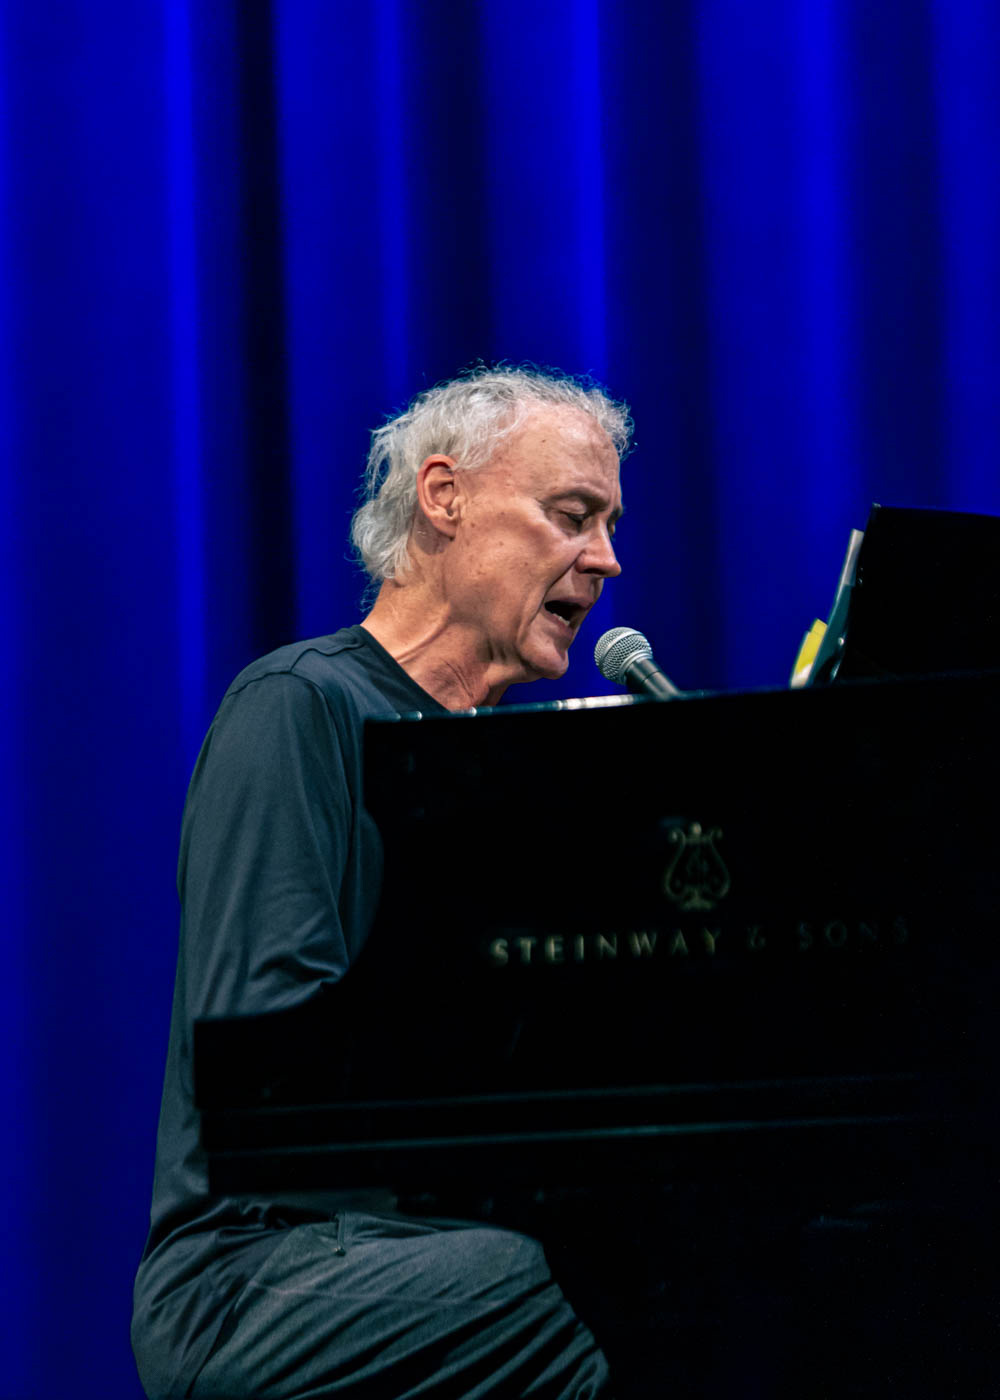 Review: Bruce Hornsby’s Great Evening of Nostalgia